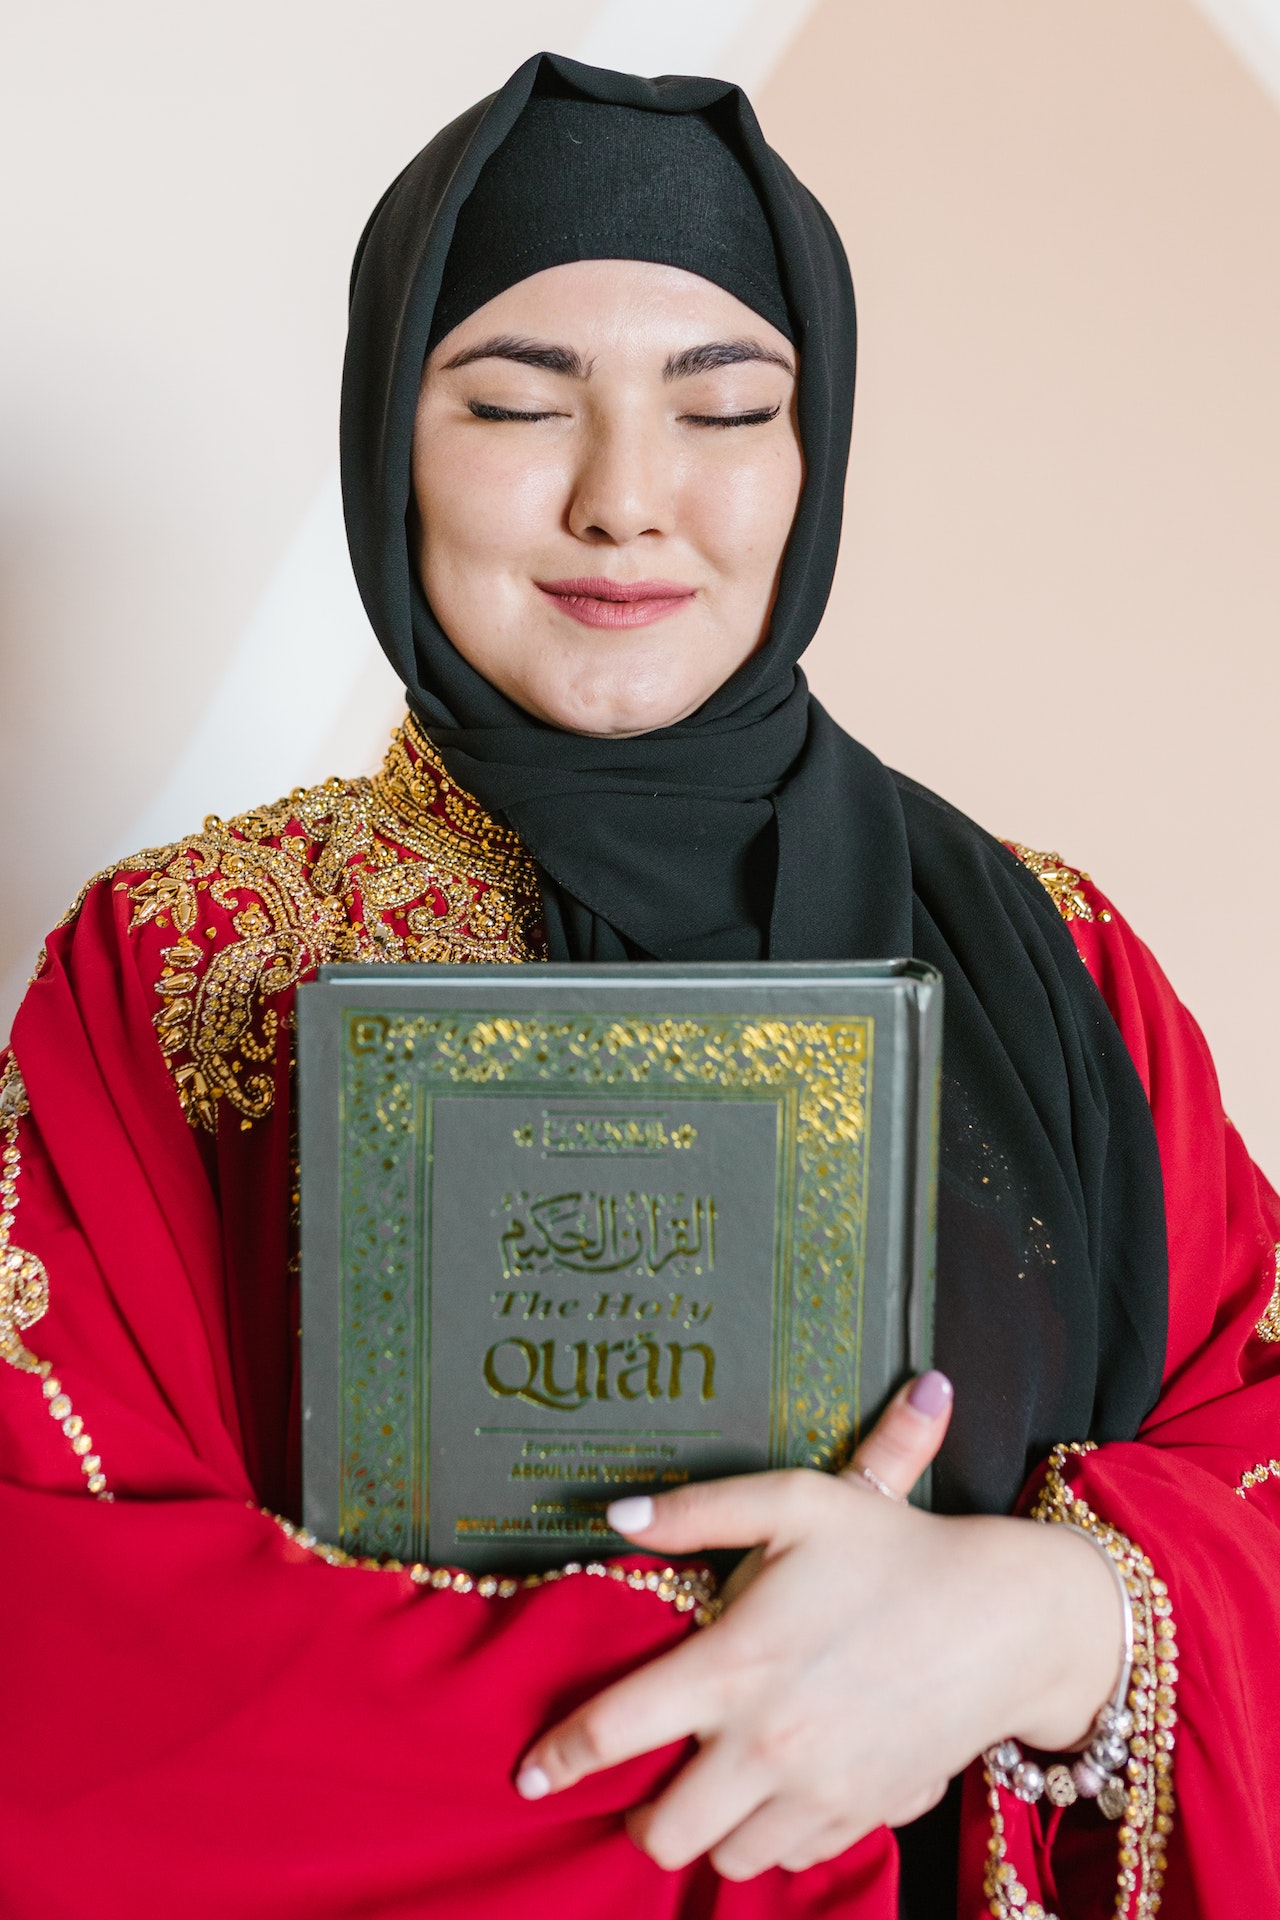 Good muslim after reading the quran